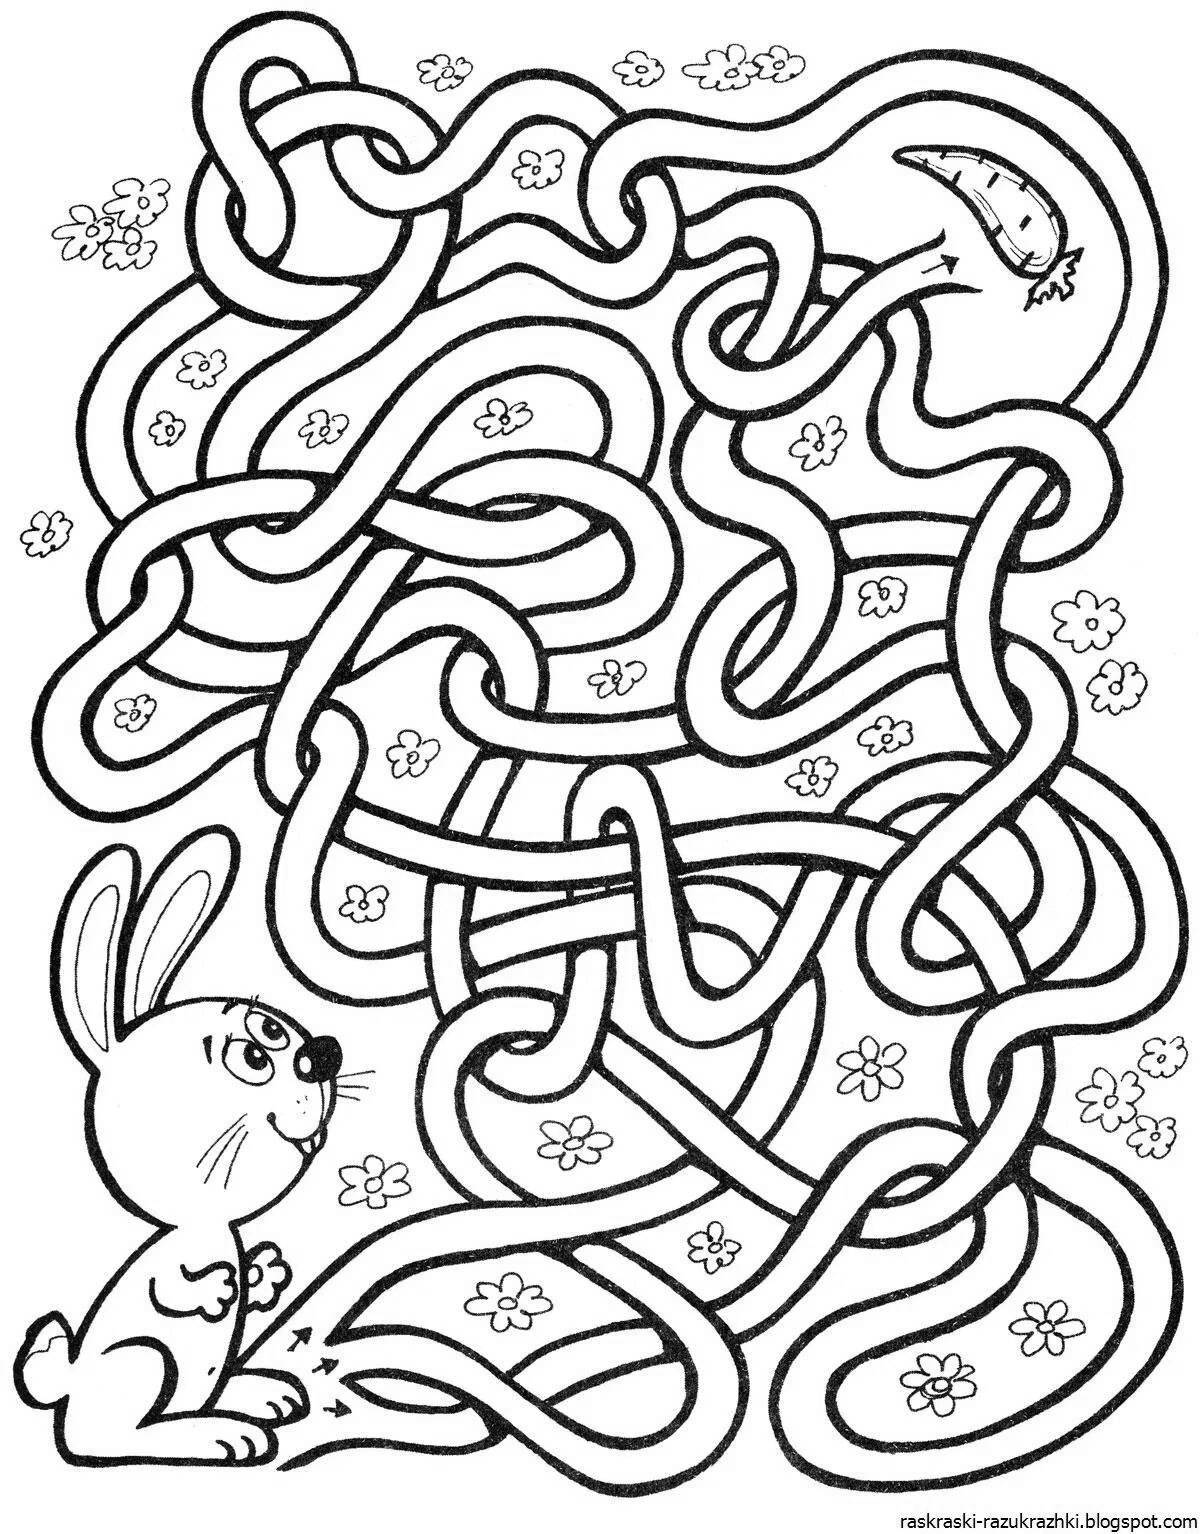 Fabulous maze coloring book for 7 year olds